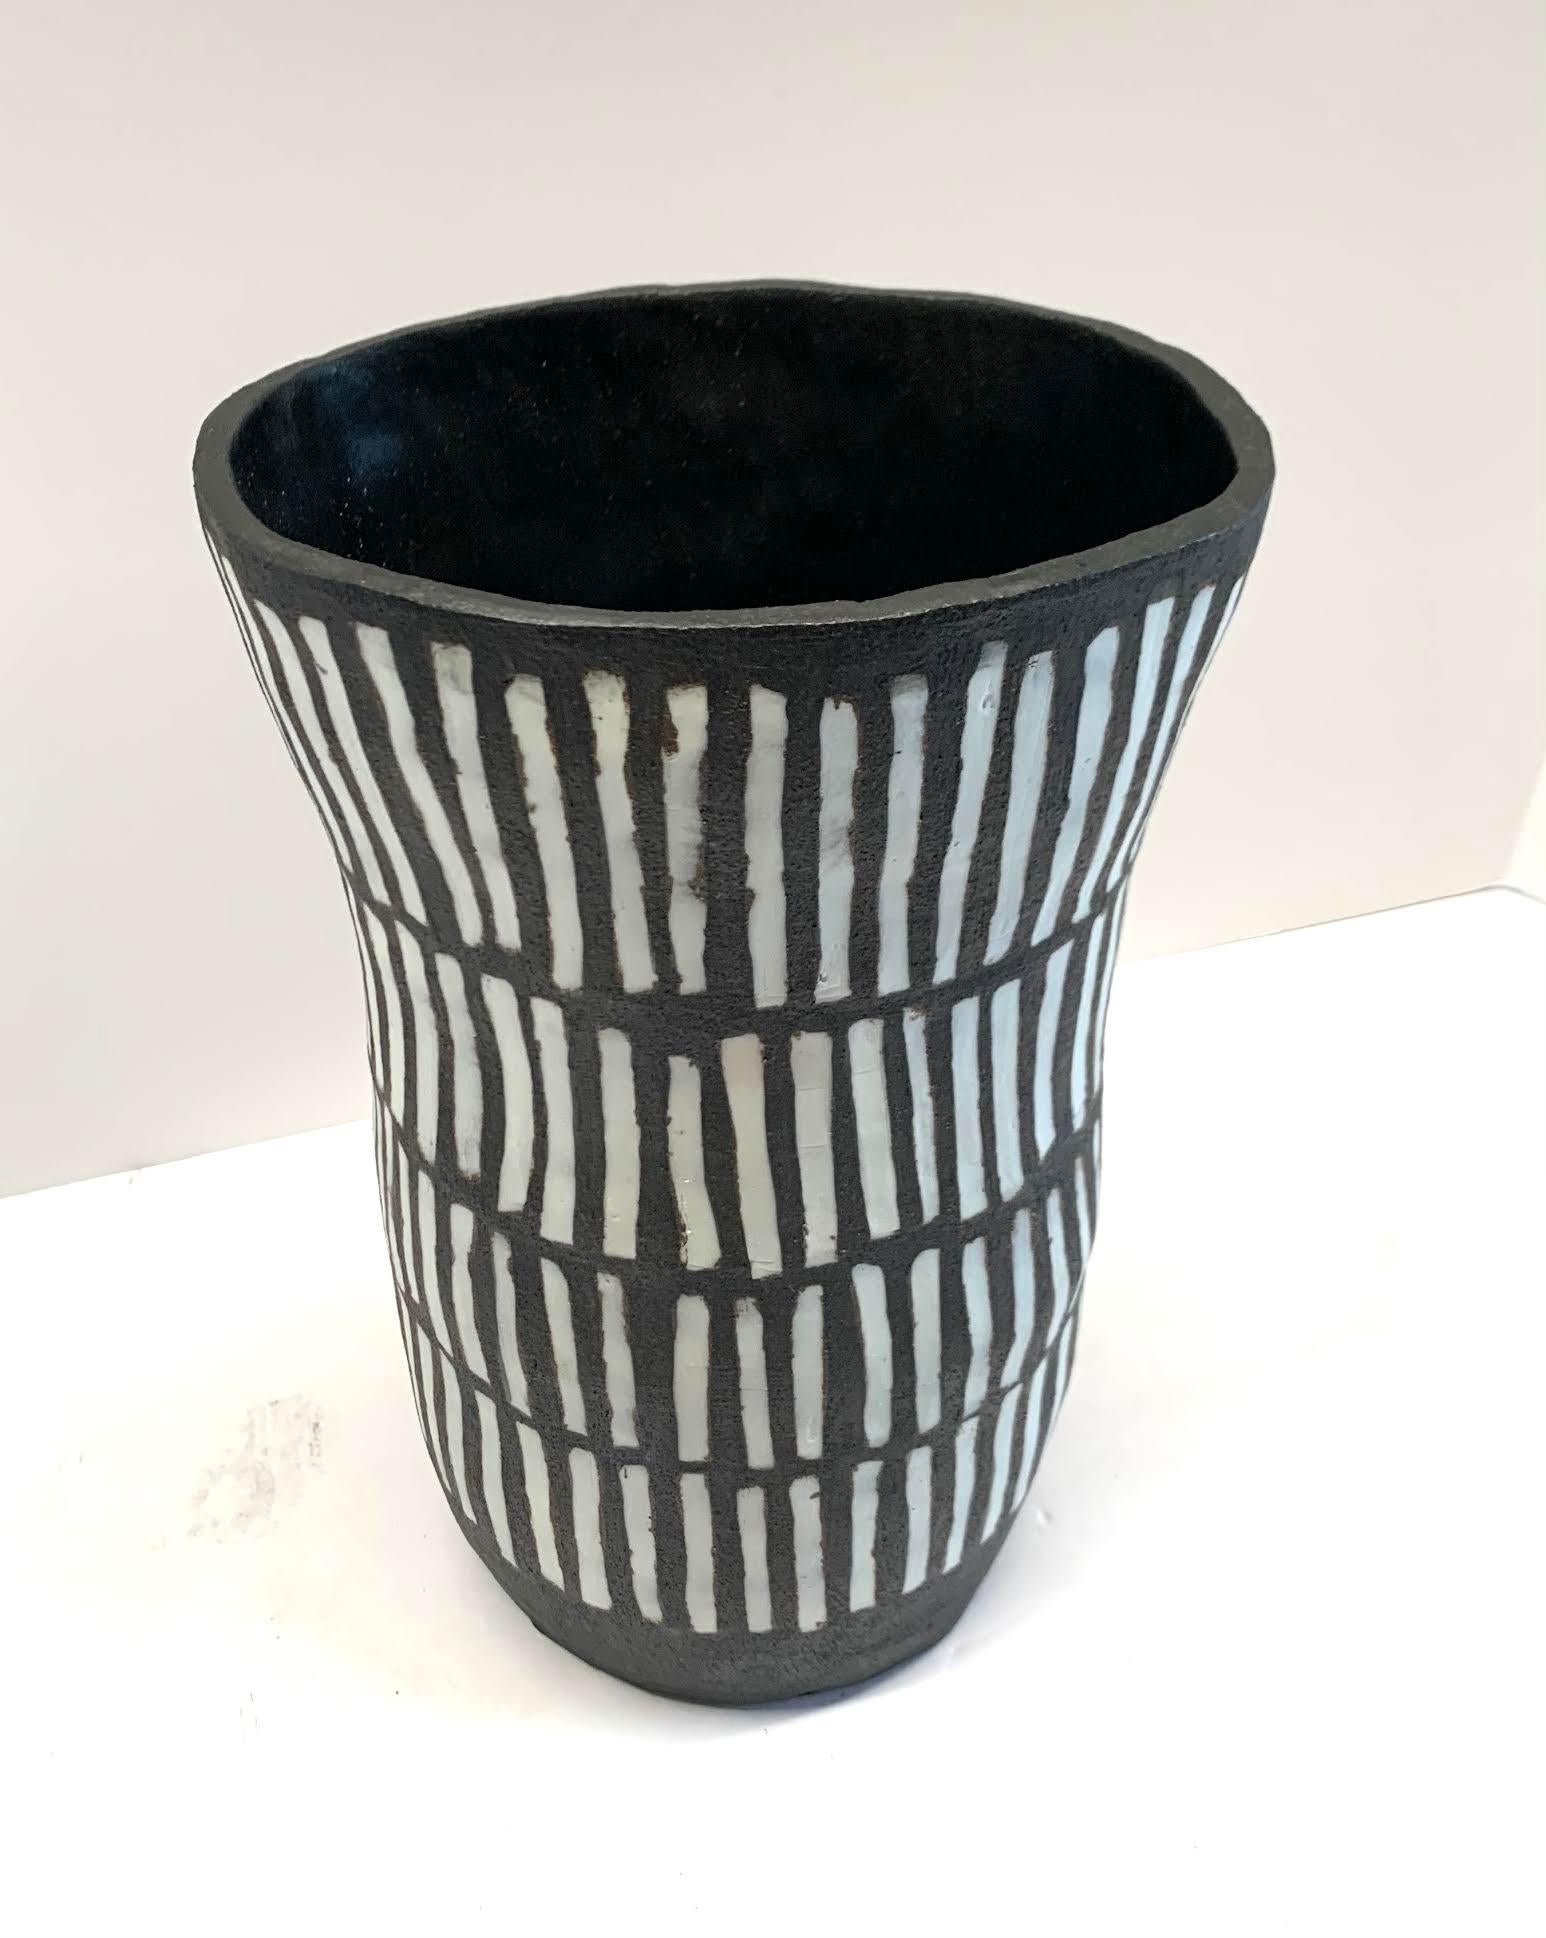 Contemporary American ceramicist Brenda Holzke hand made unique one of a kind stoneware vase that made of dark stoneware and porcelain slip.
Matchstick design.